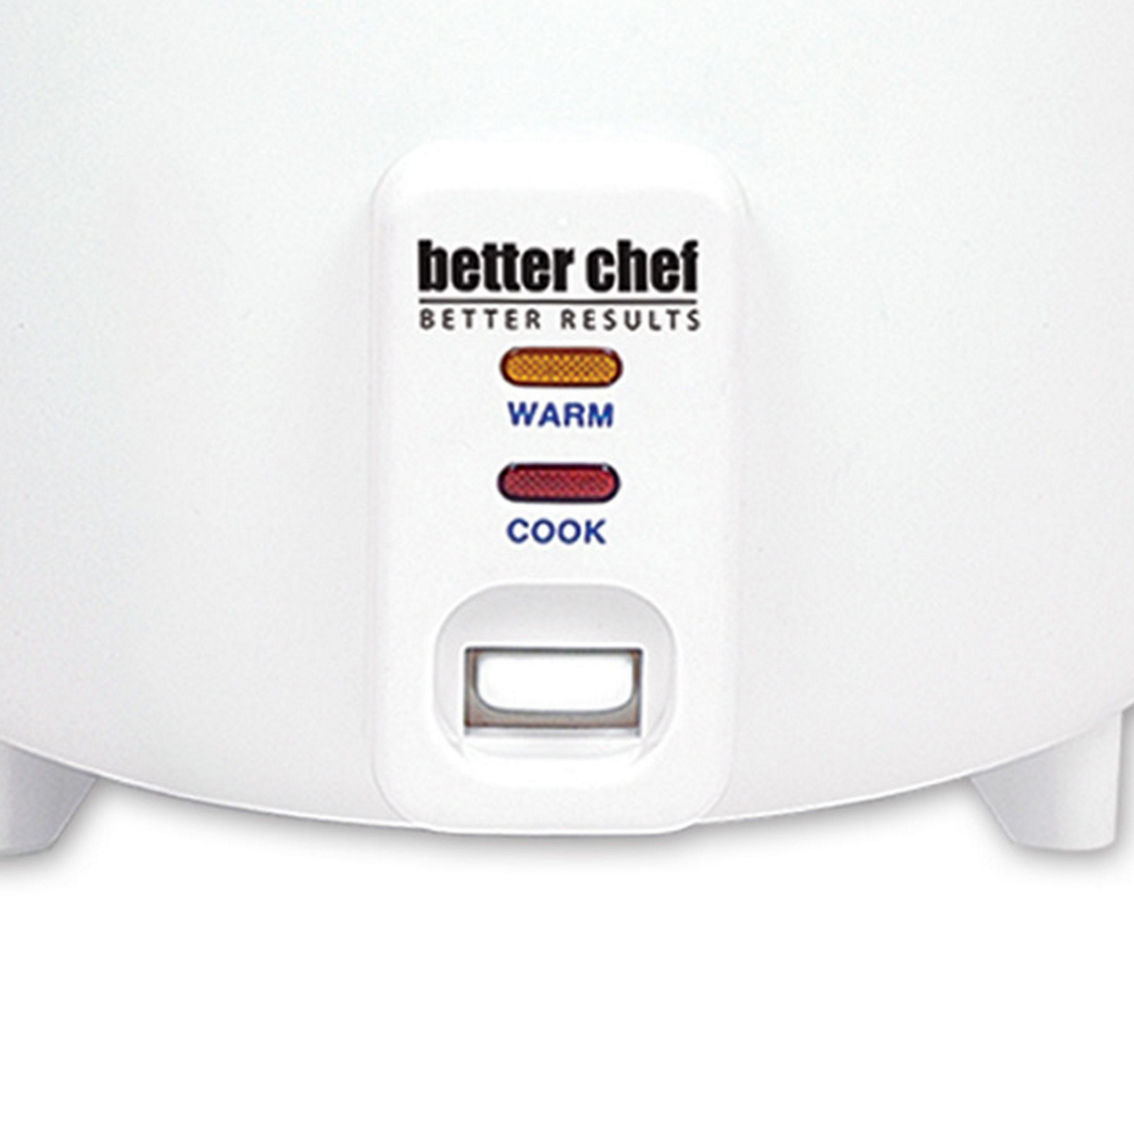 Better Chef IM-400 8-Cup (16-Cups Cooked) Automatic Rice Cooker in White - Image 2 of 4